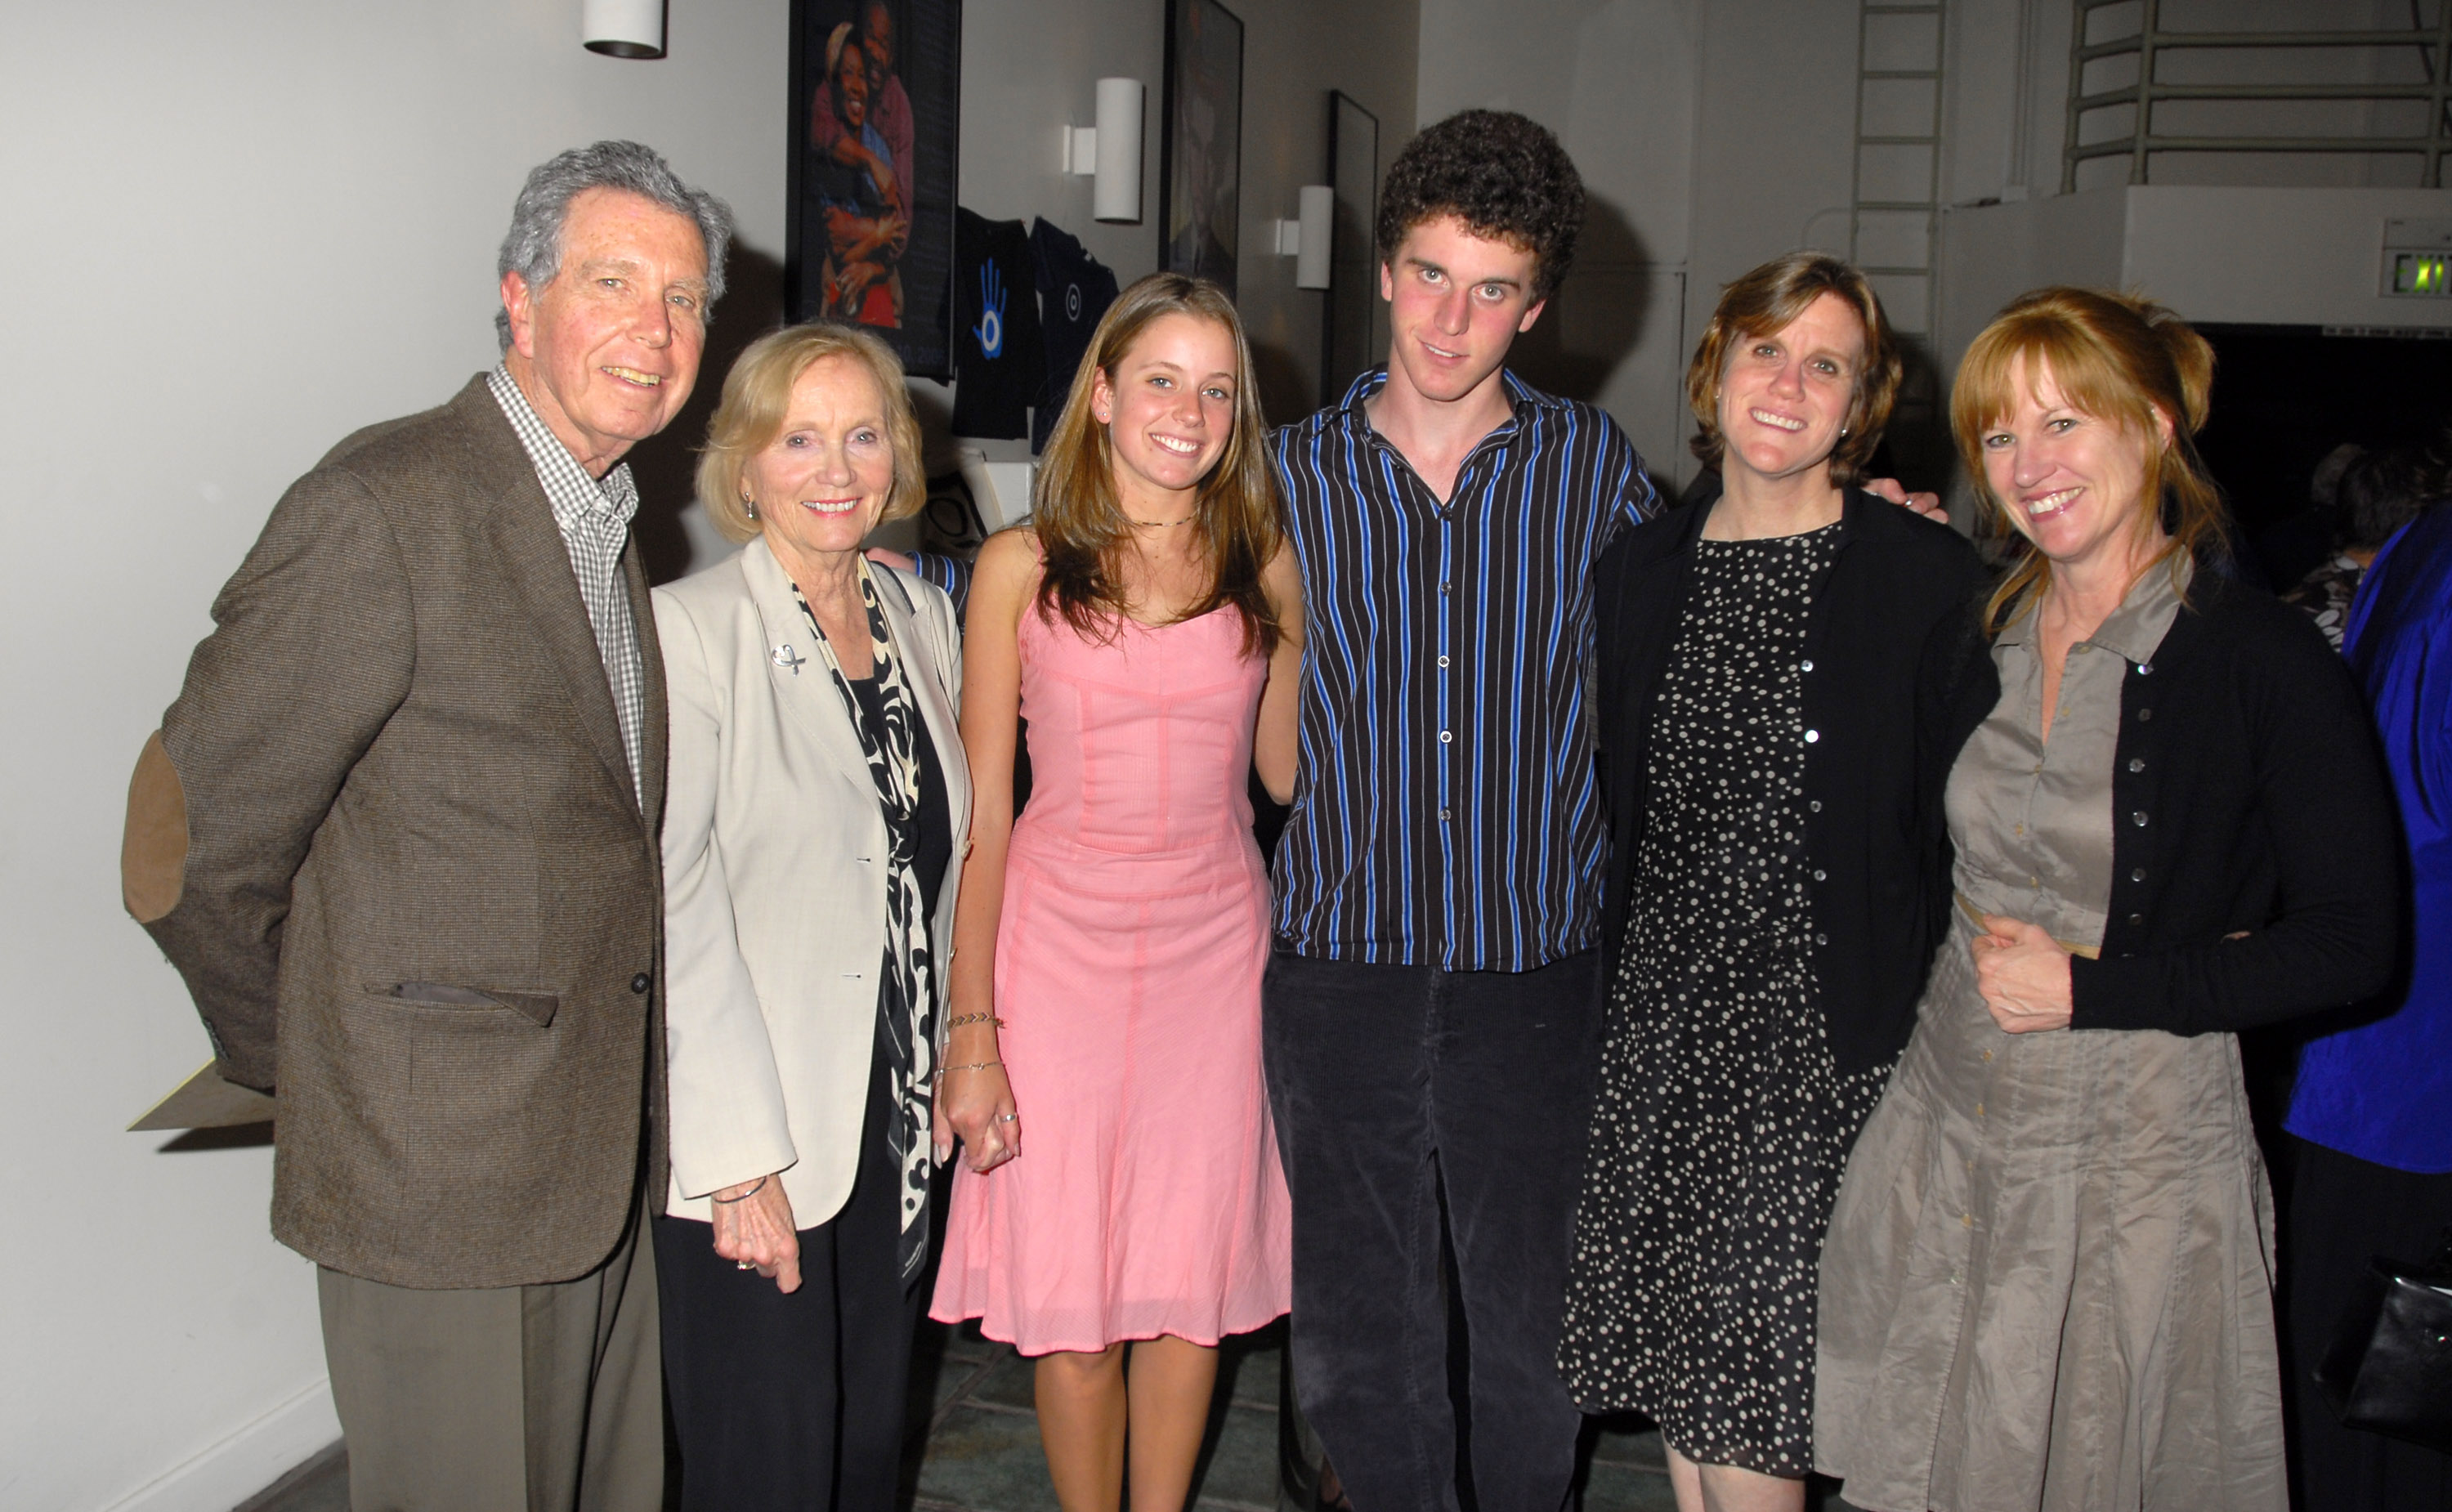 Jeffrey Hayden and Eva Marie Saint with their family at the opening night of "Desire Under The Elms" in 2007 | Source: Getty Images